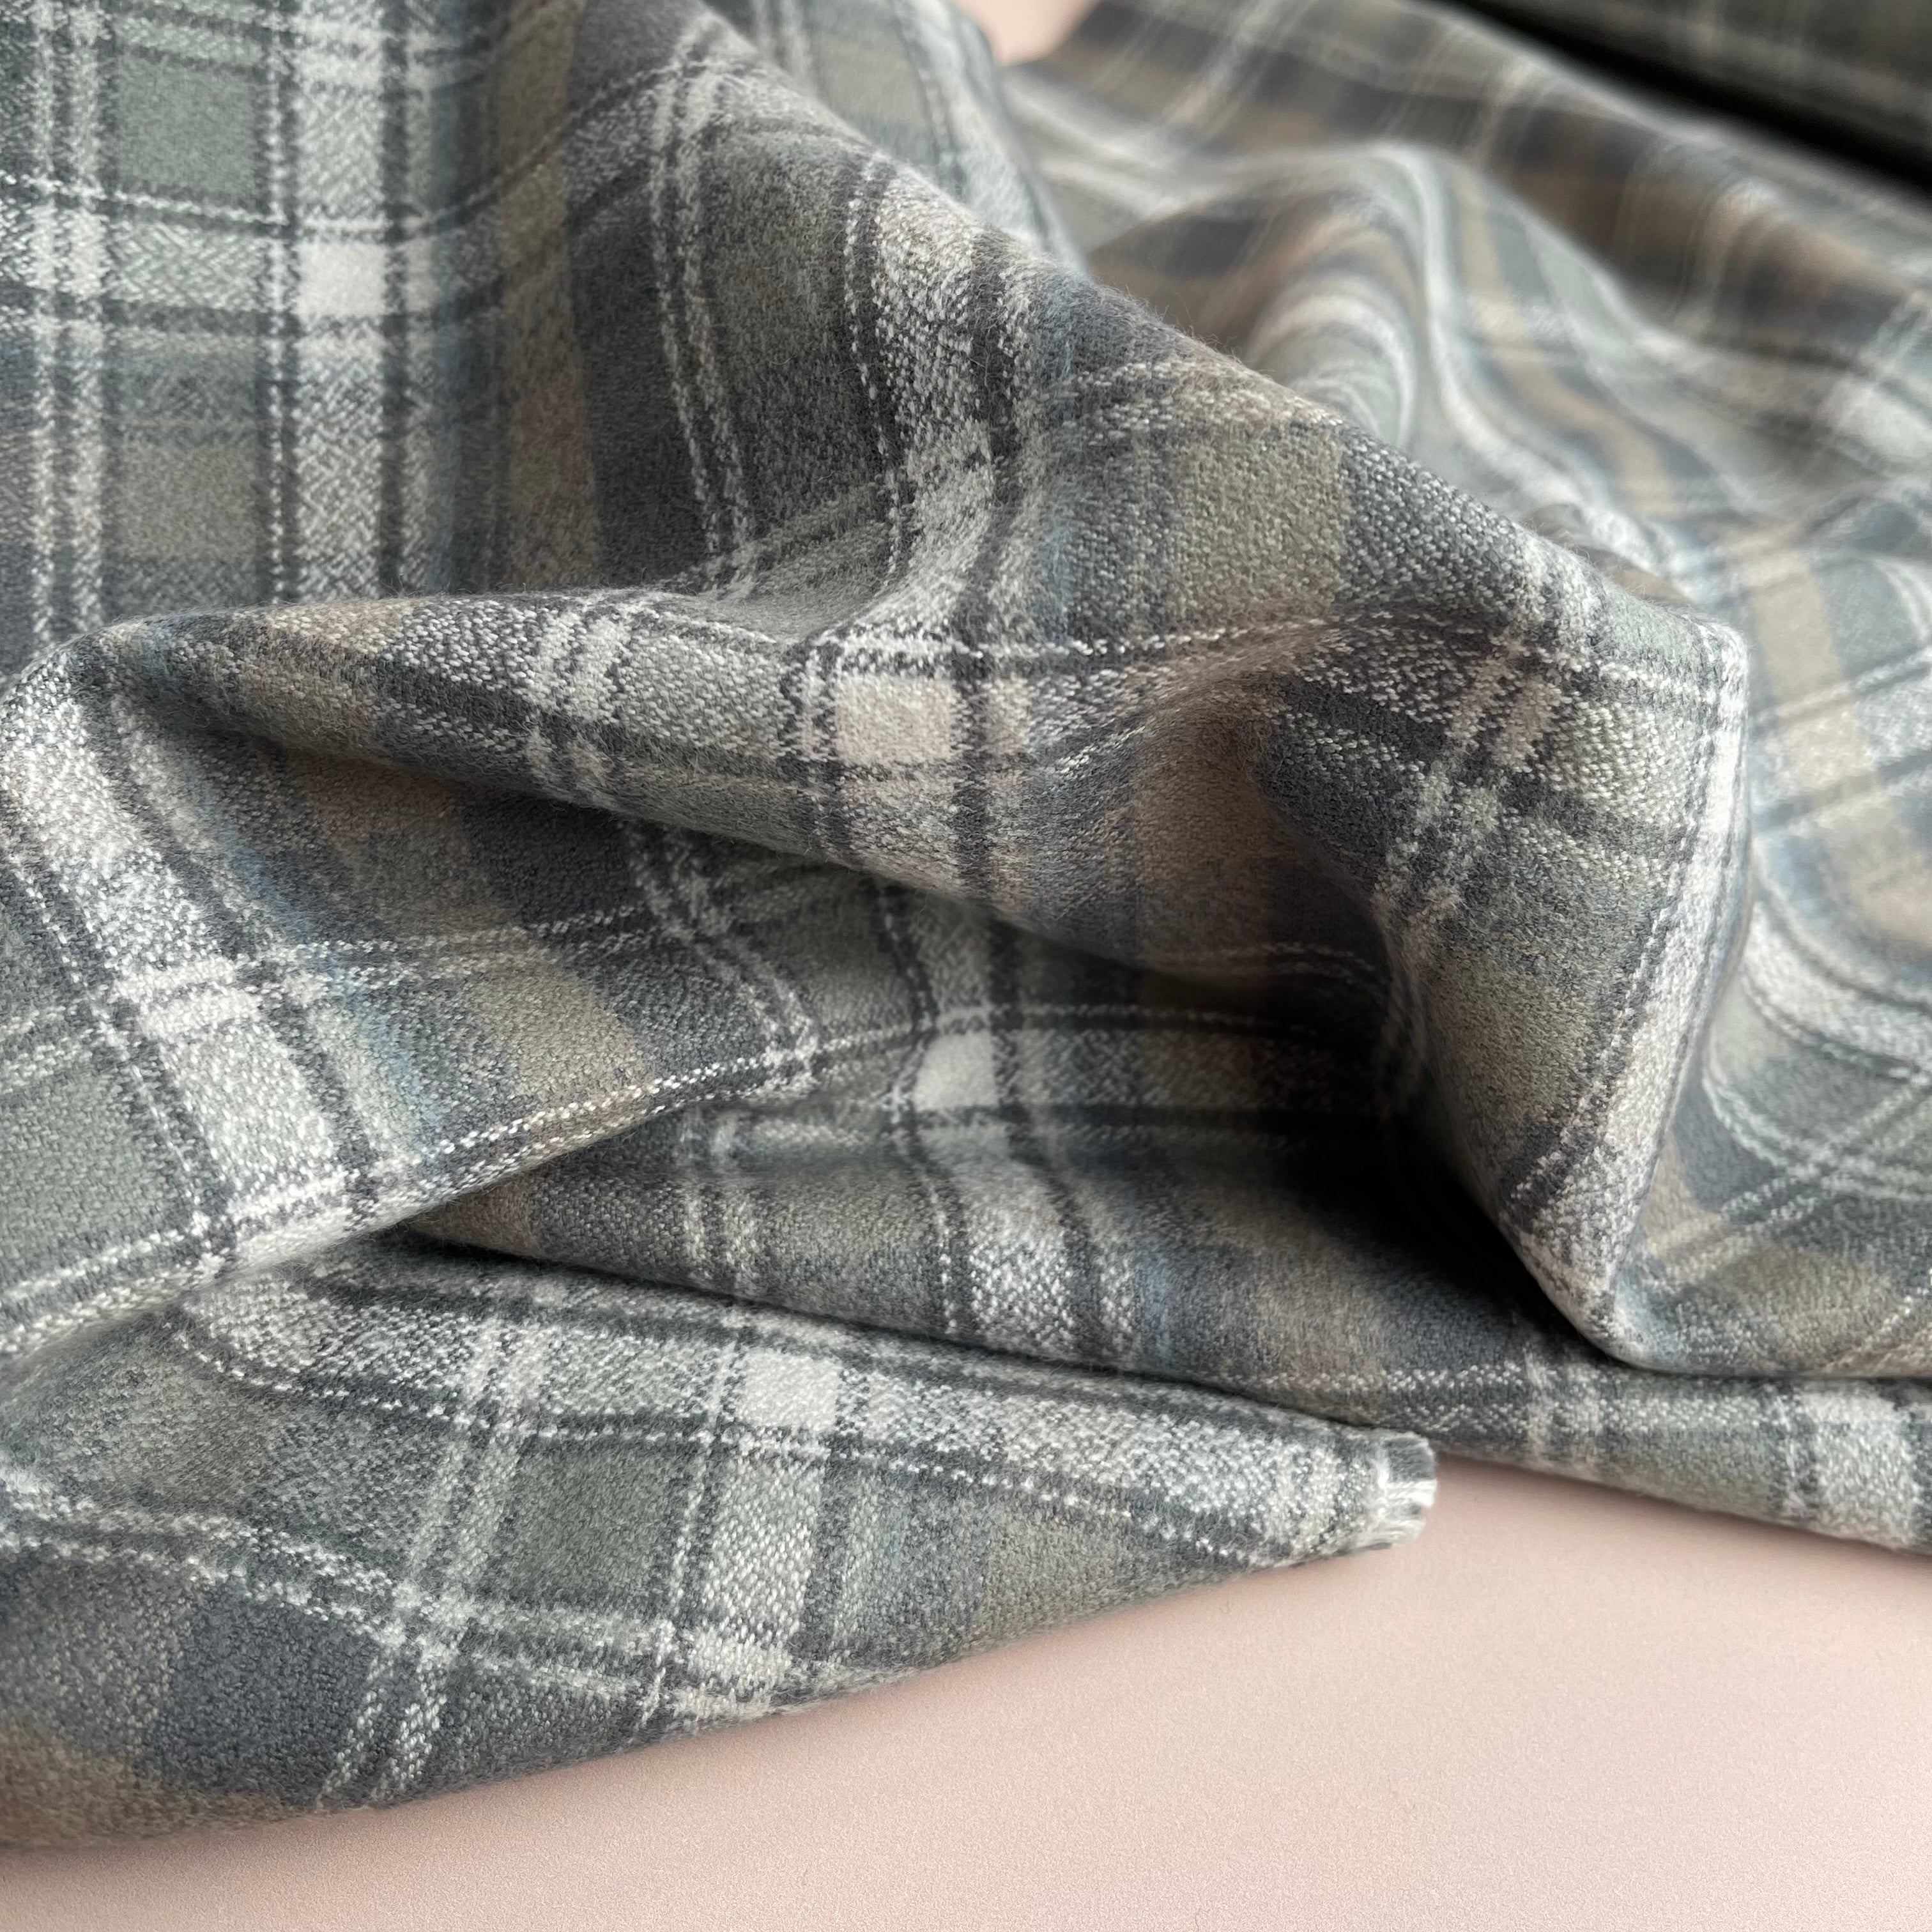 REMNANT 1 metre - Storm Mammoth Organic Cotton Flannel